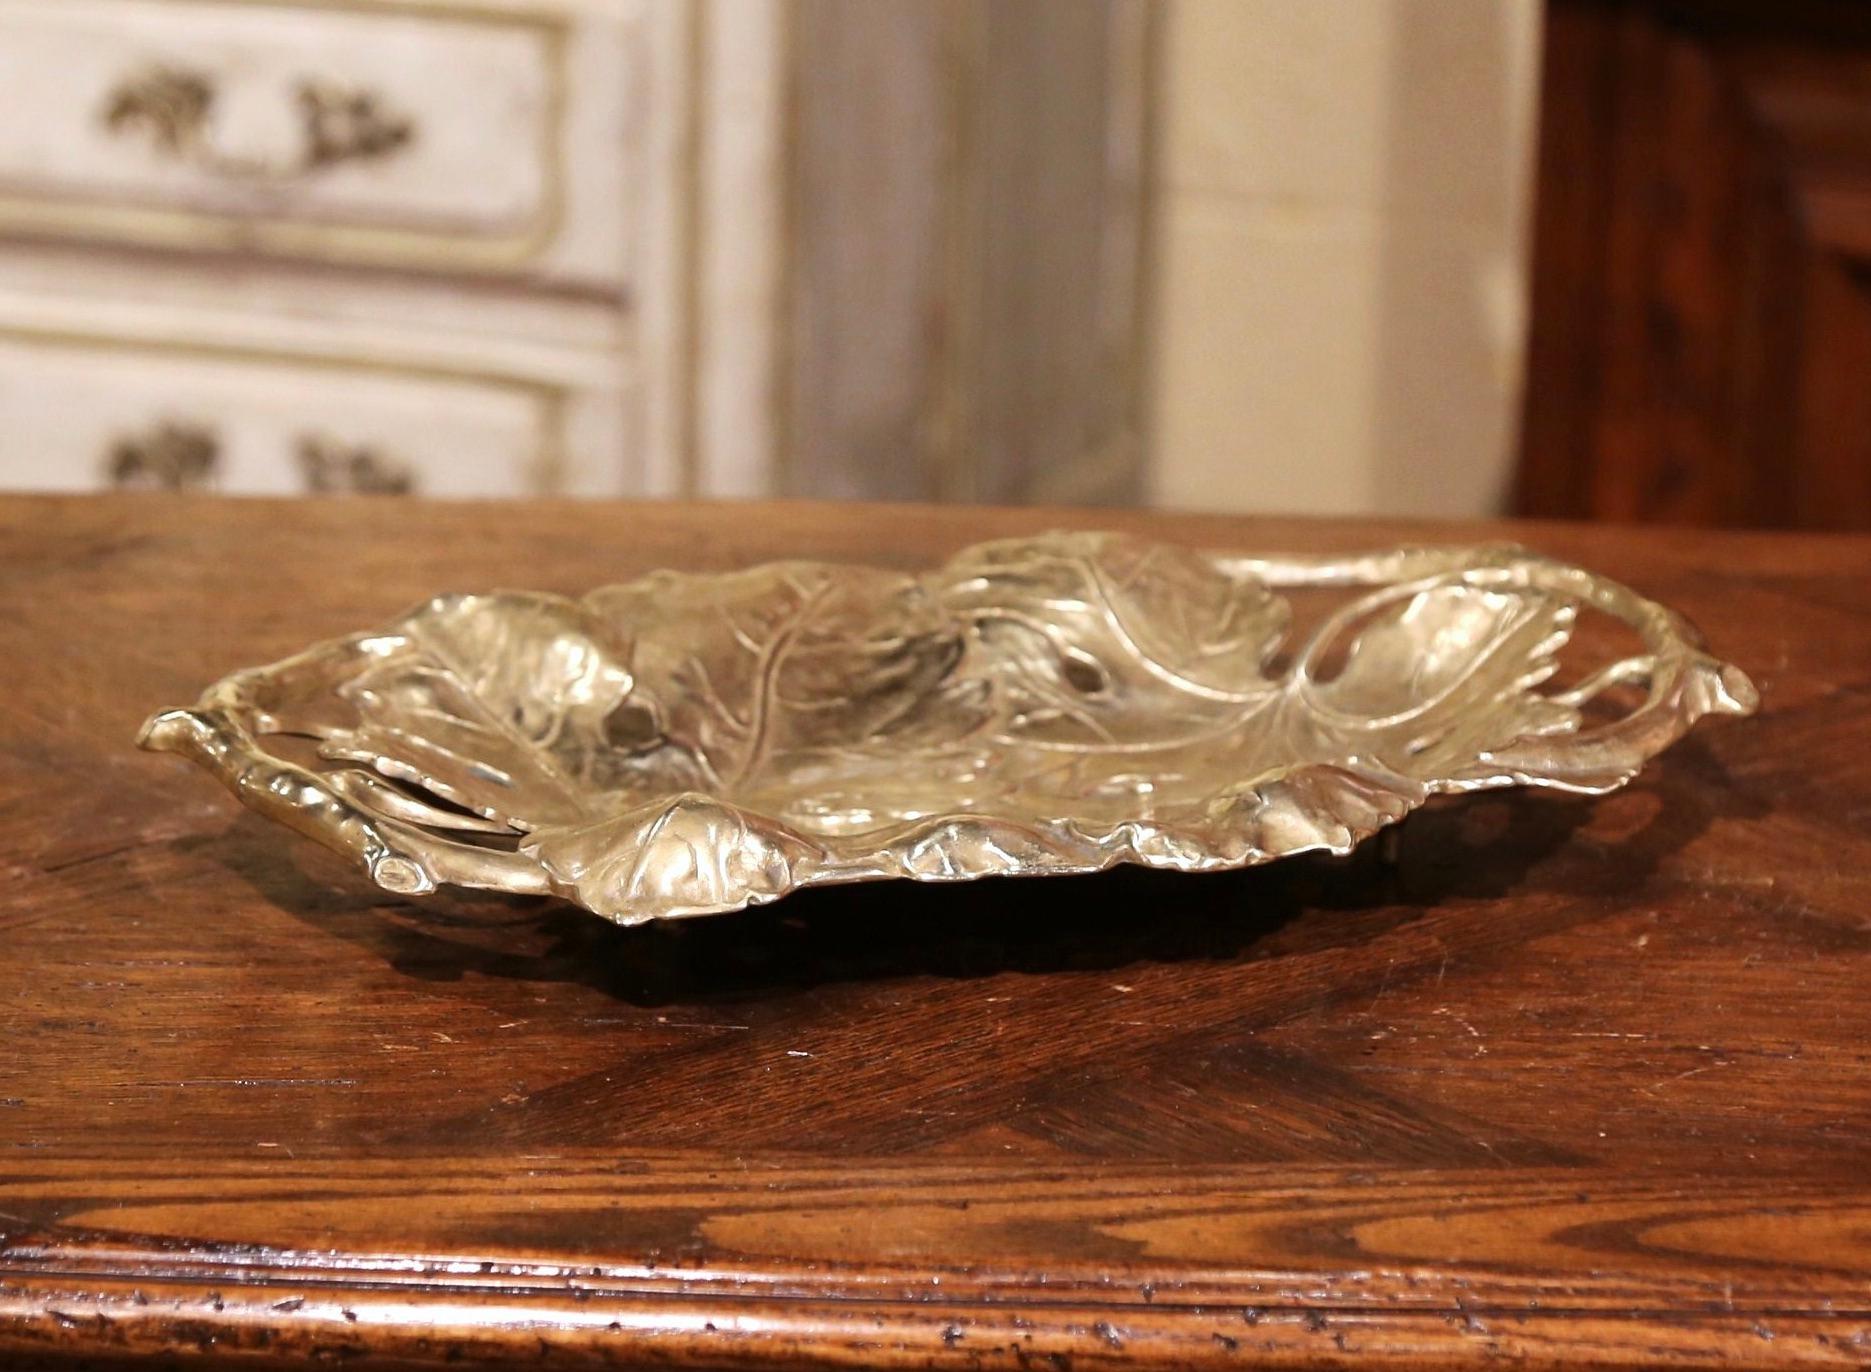 Display your sweet or crackers in this decorative antique dish from France; crafted circa 1880 and made of solid brass, the platter features exquisite and detailed repousse vine and leaf decor including tree root handles. The ornate vide-poche is in